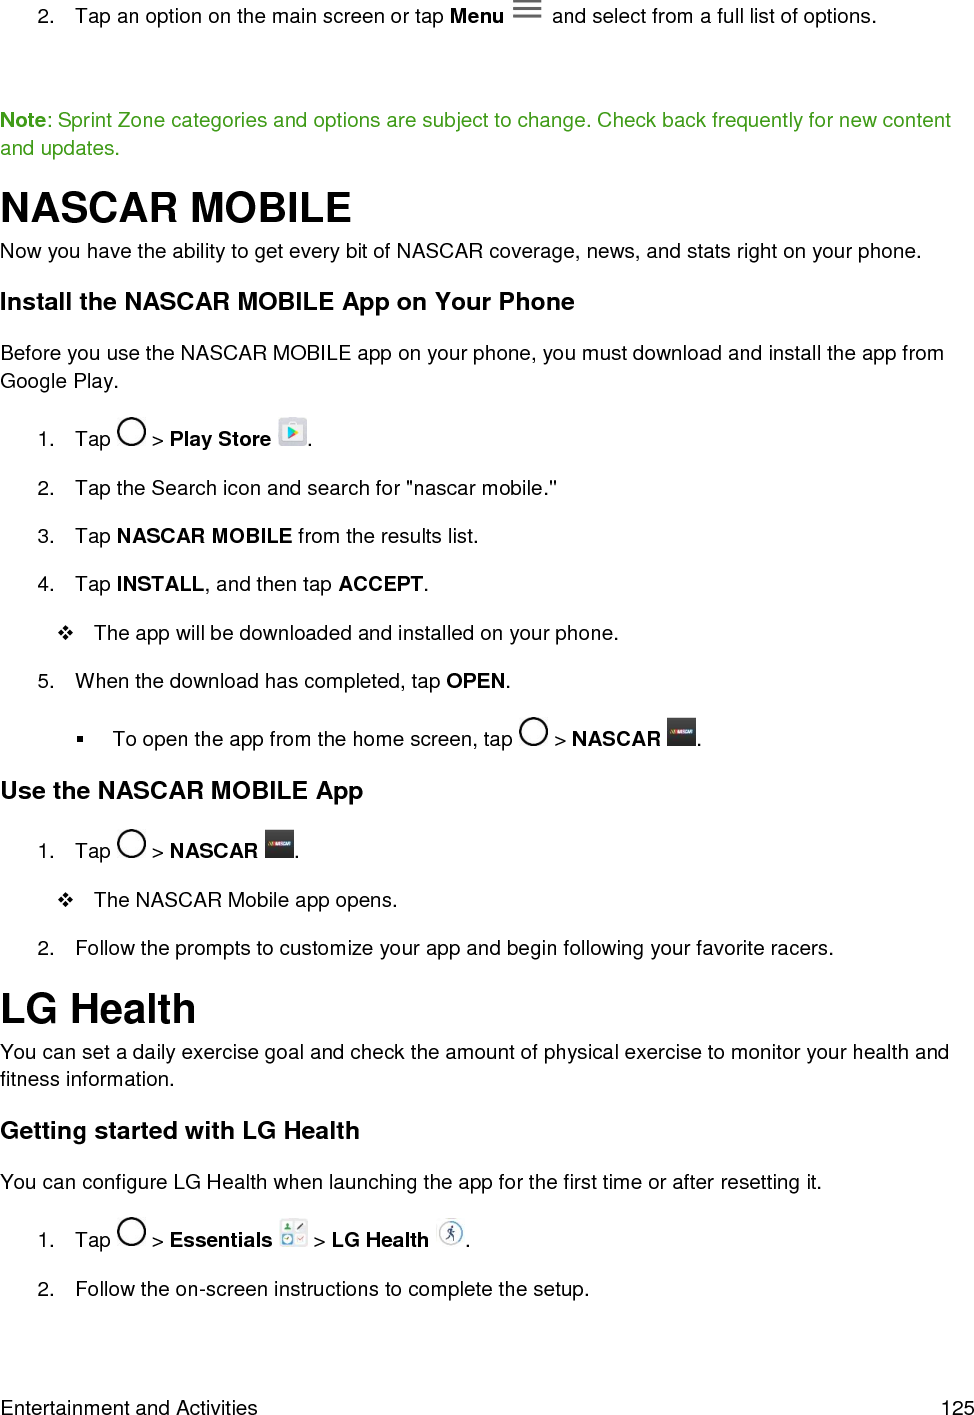  Entertainment and Activities  125 2.  Tap an option on the main screen or tap Menu   and select from a full list of options.     Note: Sprint Zone categories and options are subject to change. Check back frequently for new content and updates. NASCAR MOBILE Now you have the ability to get every bit of NASCAR coverage, news, and stats right on your phone. Install the NASCAR MOBILE App on Your Phone Before you use the NASCAR MOBILE app on your phone, you must download and install the app from Google Play. 1.  Tap   &gt; Play Store  . 2.  Tap the Search icon and search for &quot;nascar mobile.&quot; 3.  Tap NASCAR MOBILE from the results list. 4.  Tap INSTALL, and then tap ACCEPT.   The app will be downloaded and installed on your phone. 5.  When the download has completed, tap OPEN.   To open the app from the home screen, tap   &gt; NASCAR  . Use the NASCAR MOBILE App 1.  Tap   &gt; NASCAR  .   The NASCAR Mobile app opens. 2.  Follow the prompts to customize your app and begin following your favorite racers. LG Health You can set a daily exercise goal and check the amount of physical exercise to monitor your health and fitness information. Getting started with LG Health You can configure LG Health when launching the app for the first time or after resetting it. 1.  Tap   &gt; Essentials   &gt; LG Health  . 2.  Follow the on-screen instructions to complete the setup. 